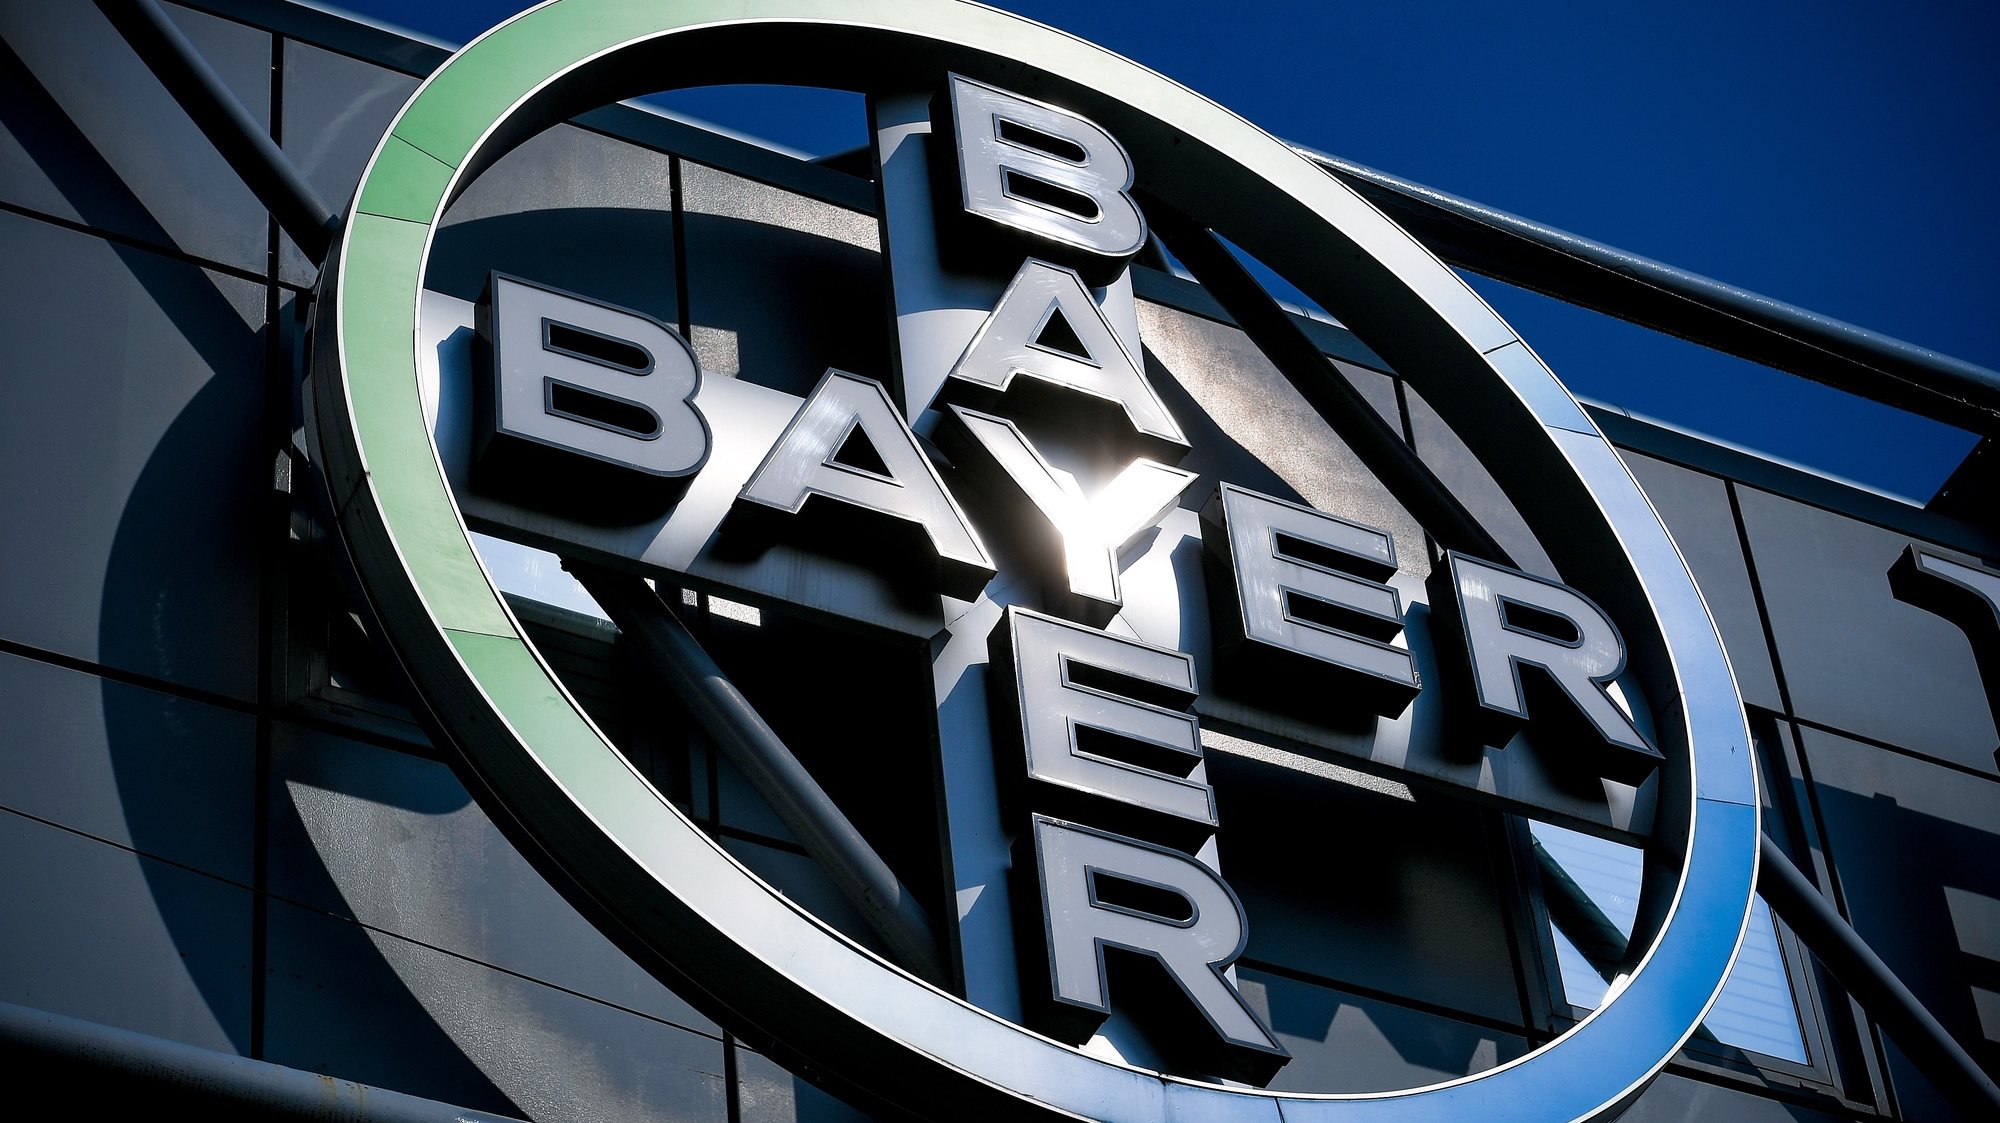 epa08506476 (FILE) - The logo of German pharmaceutical giant Bayer AG is seen in Wuppertal, Germany, 09 April 2019 (reissued 24 June 2020). According to media reports, German pharmaceutical and agrochemical company Bayer has reached an agreement with a majority of the more than 100,000 plaintiffs in the US in relation to the herbicide glyphosate.  EPA/SASCHA STEINBACH *** Local Caption *** 55190607